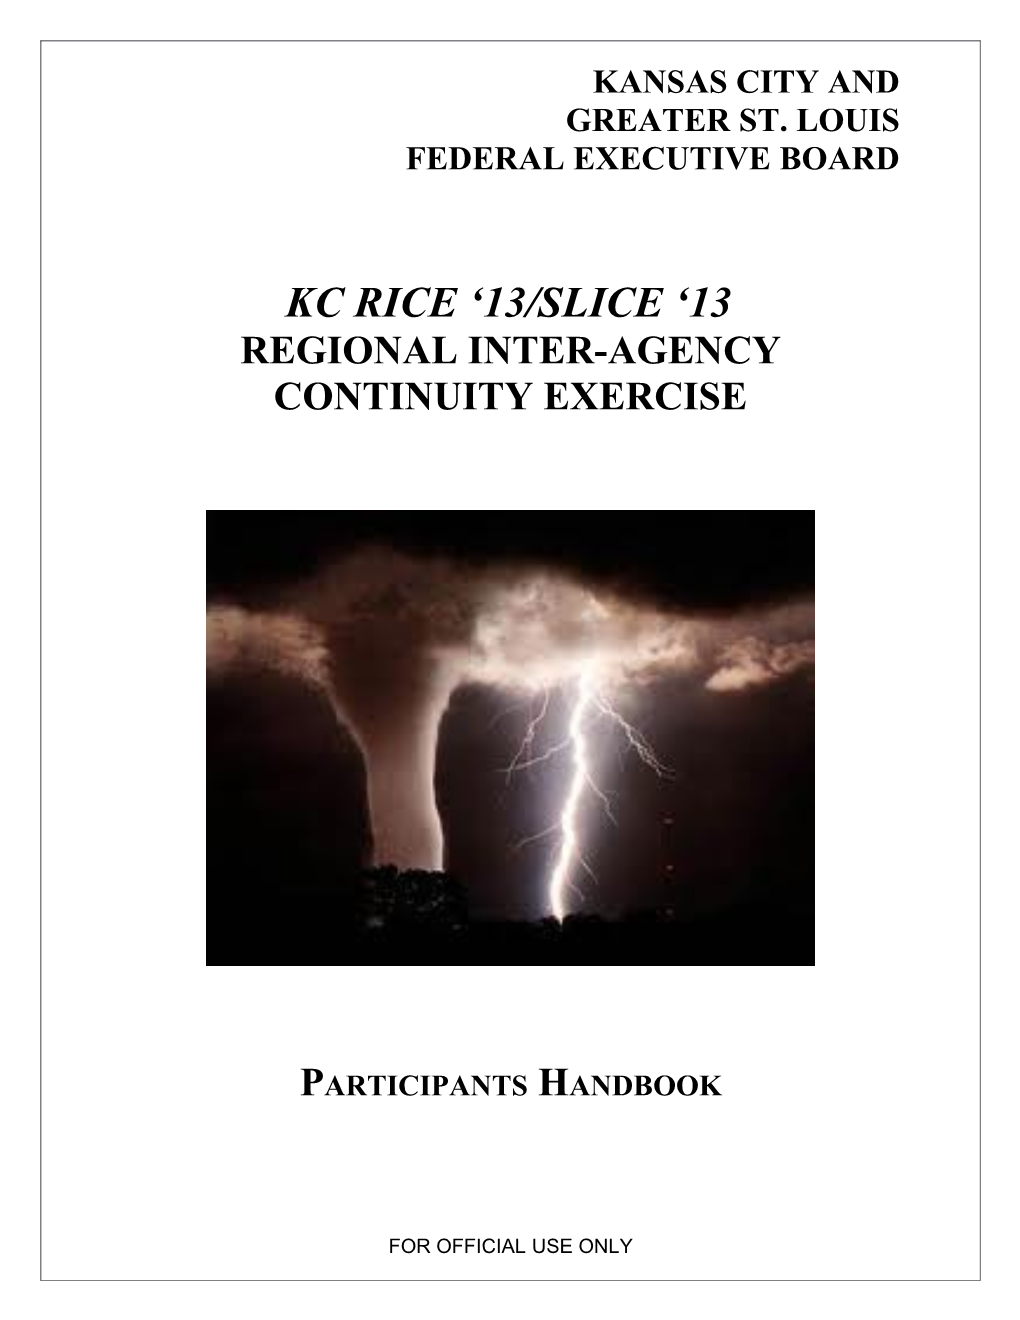 Regional Inter-Agency Continuity Exercise